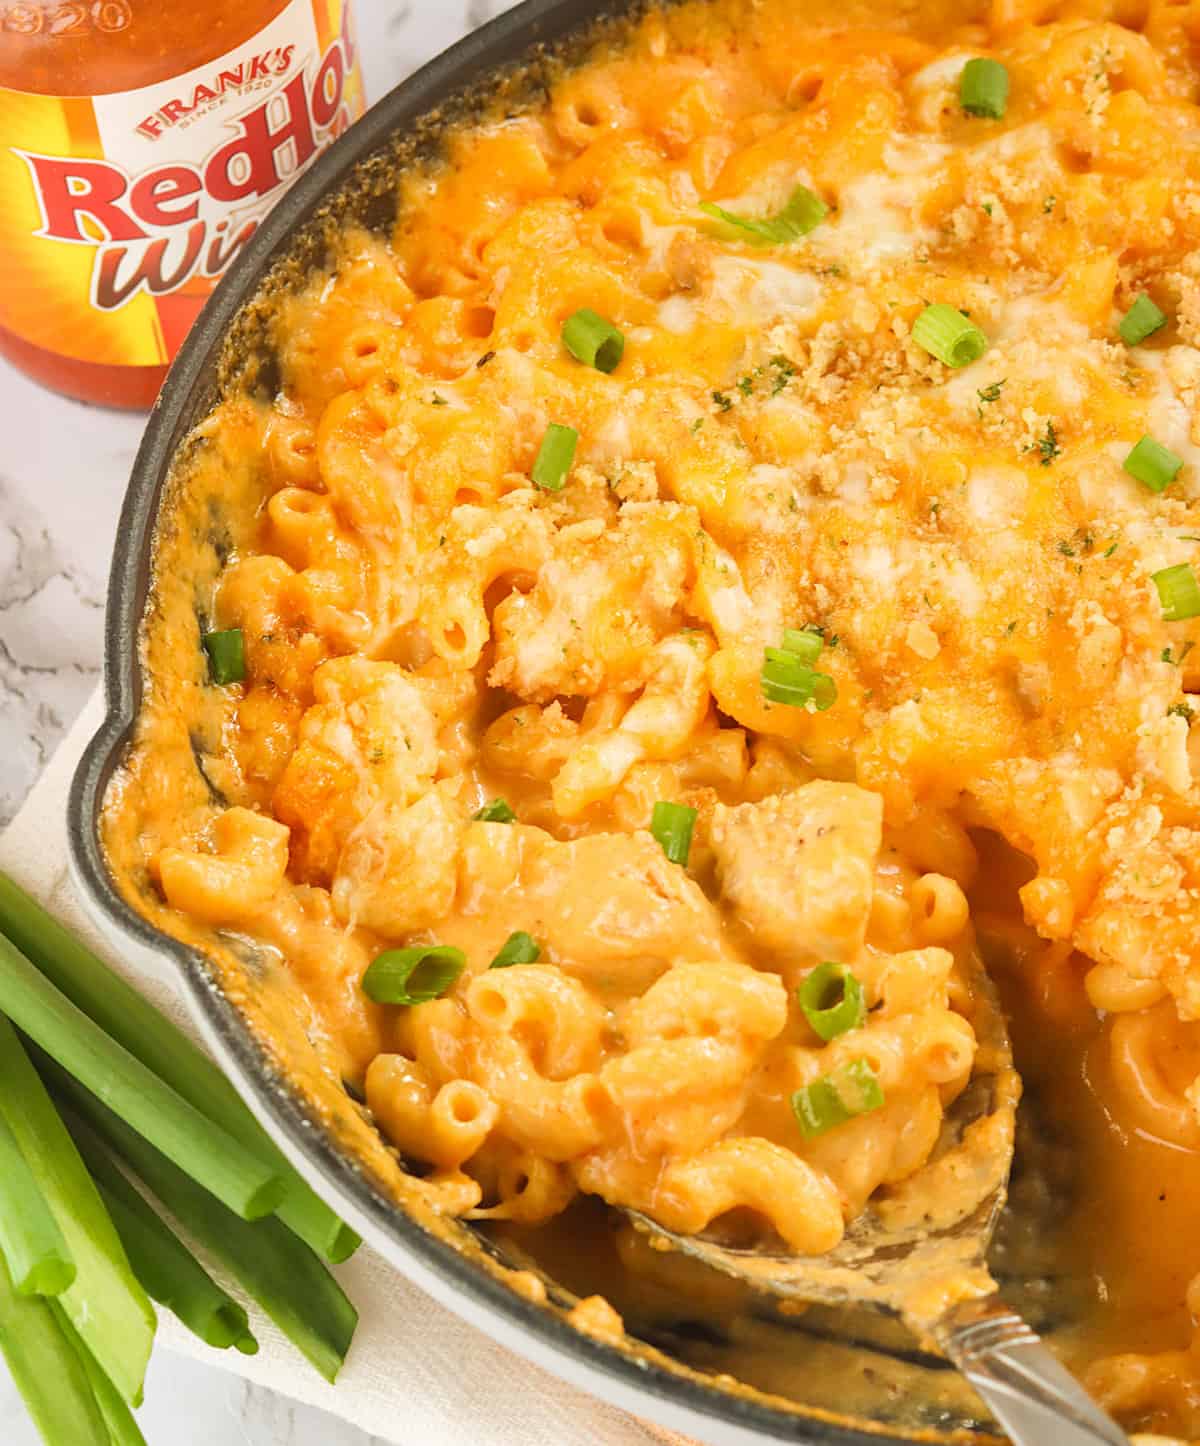 Serving up steaming hot Buffalo Chicken Mac and Cheese with Frank's RedHot on the side